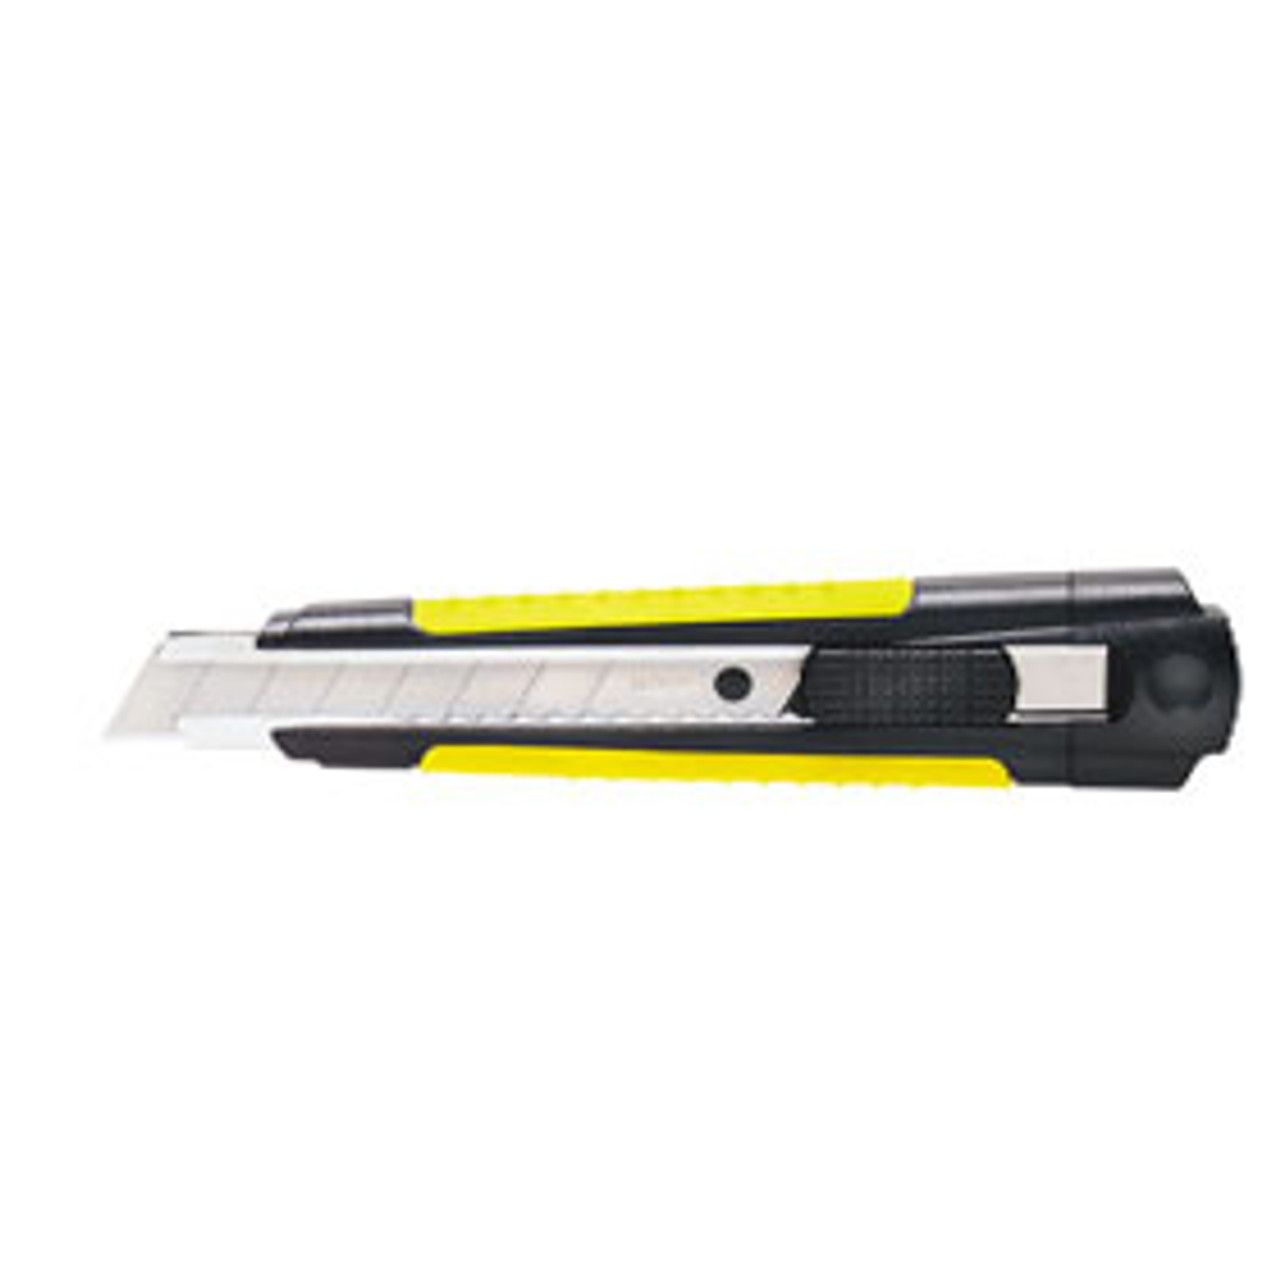 Steel Track Snappy Knife - 8 pt. w/ Rubber Handle